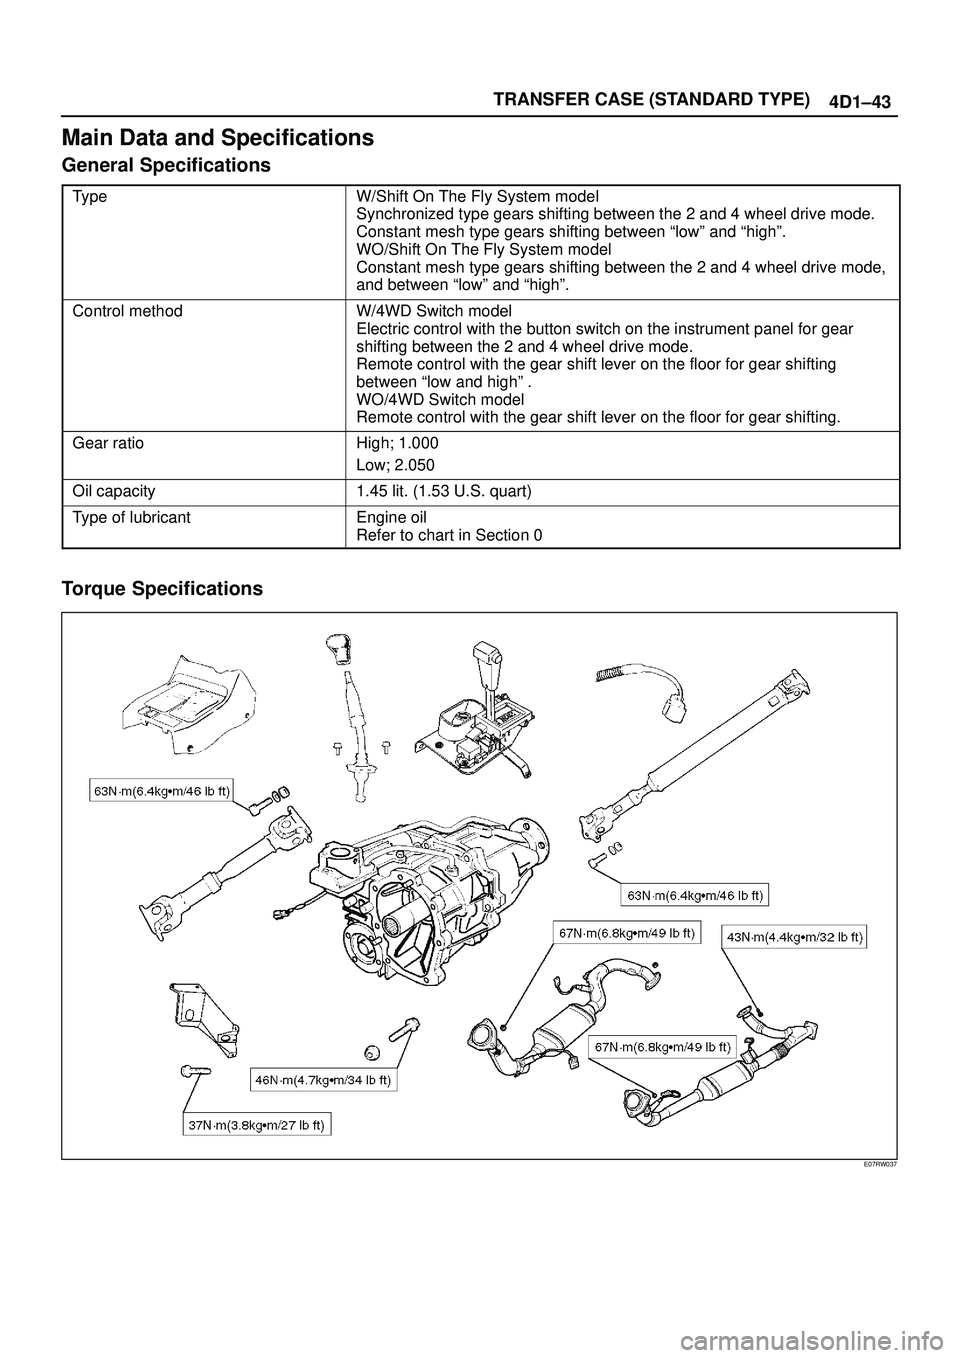 ISUZU TROOPER 1998  Service Repair Manual TRANSFER CASE (STANDARD TYPE)
4D1±43
Main Data and Specifications
General Specifications
TypeW/Shift On The Fly System model
Synchronized type gears shifting between the 2 and 4 wheel drive mode.
Con